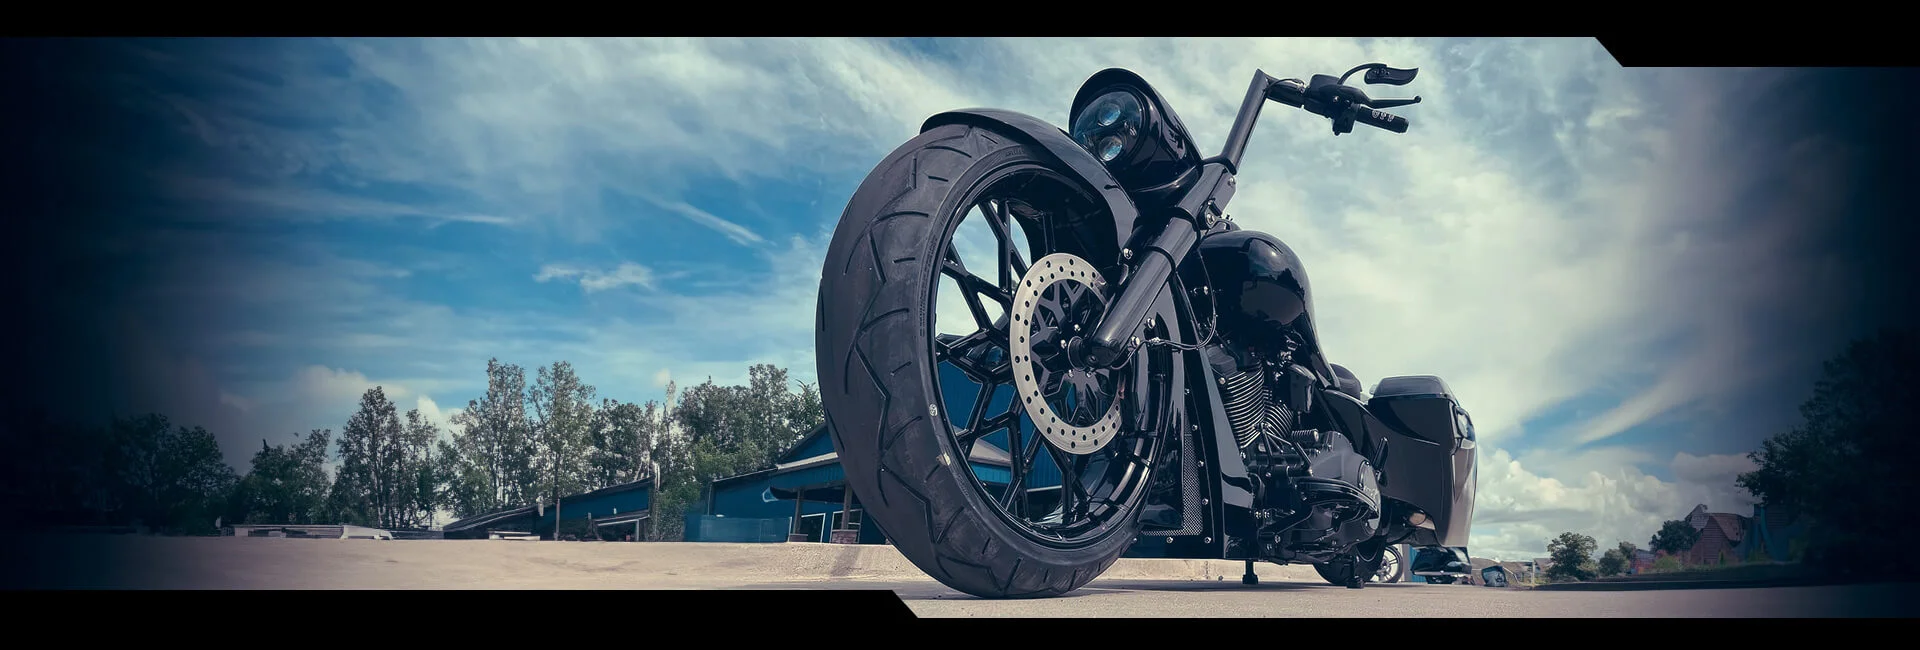 Custom Harley Wheel & Tire Packages From SMT